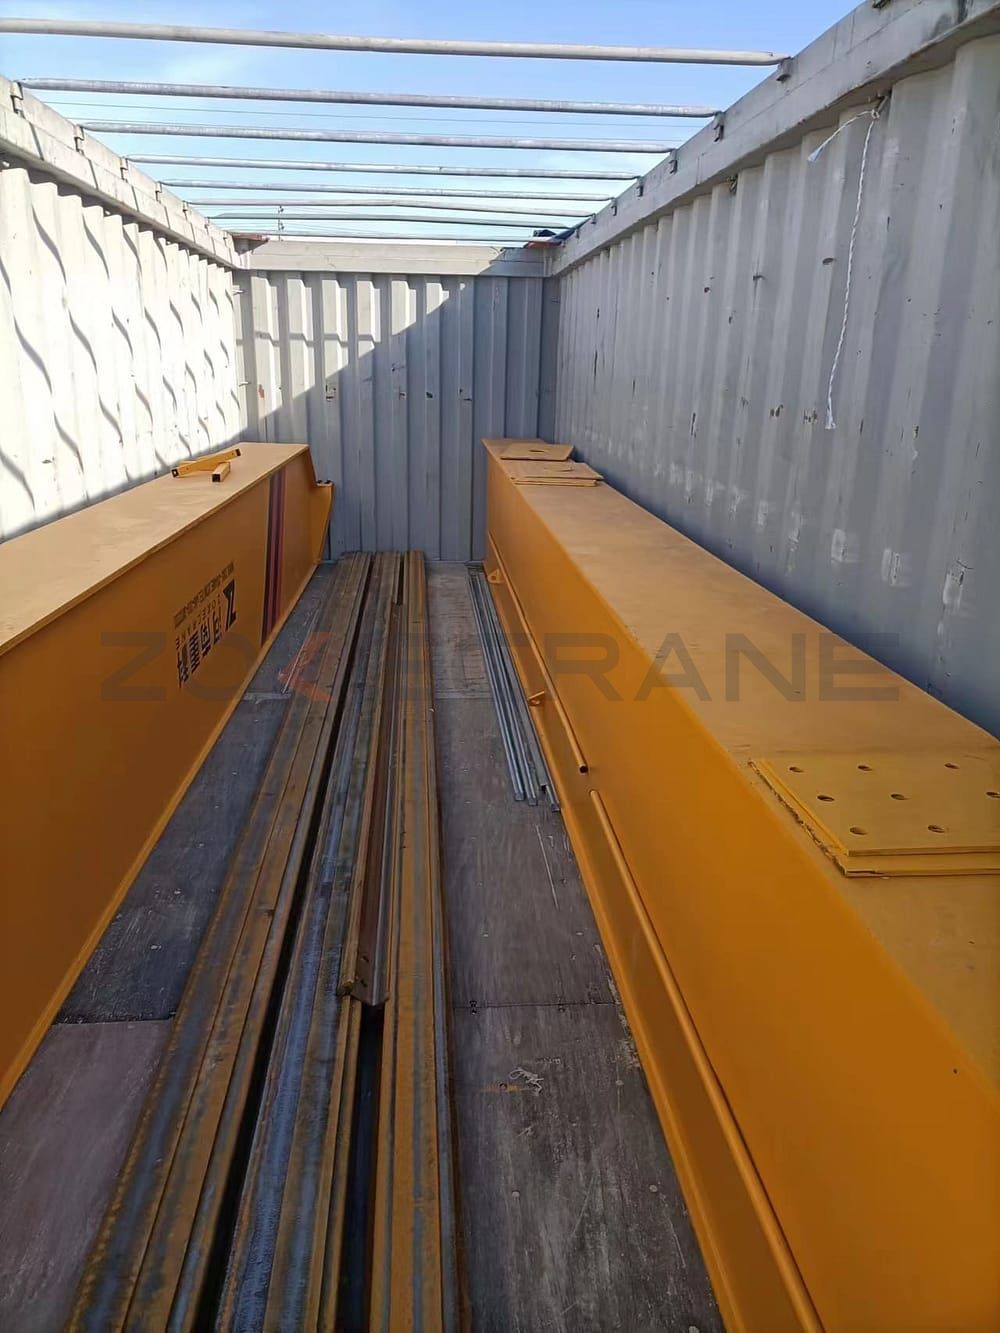 Bridge cranes and transfer carts exported to Indonesia